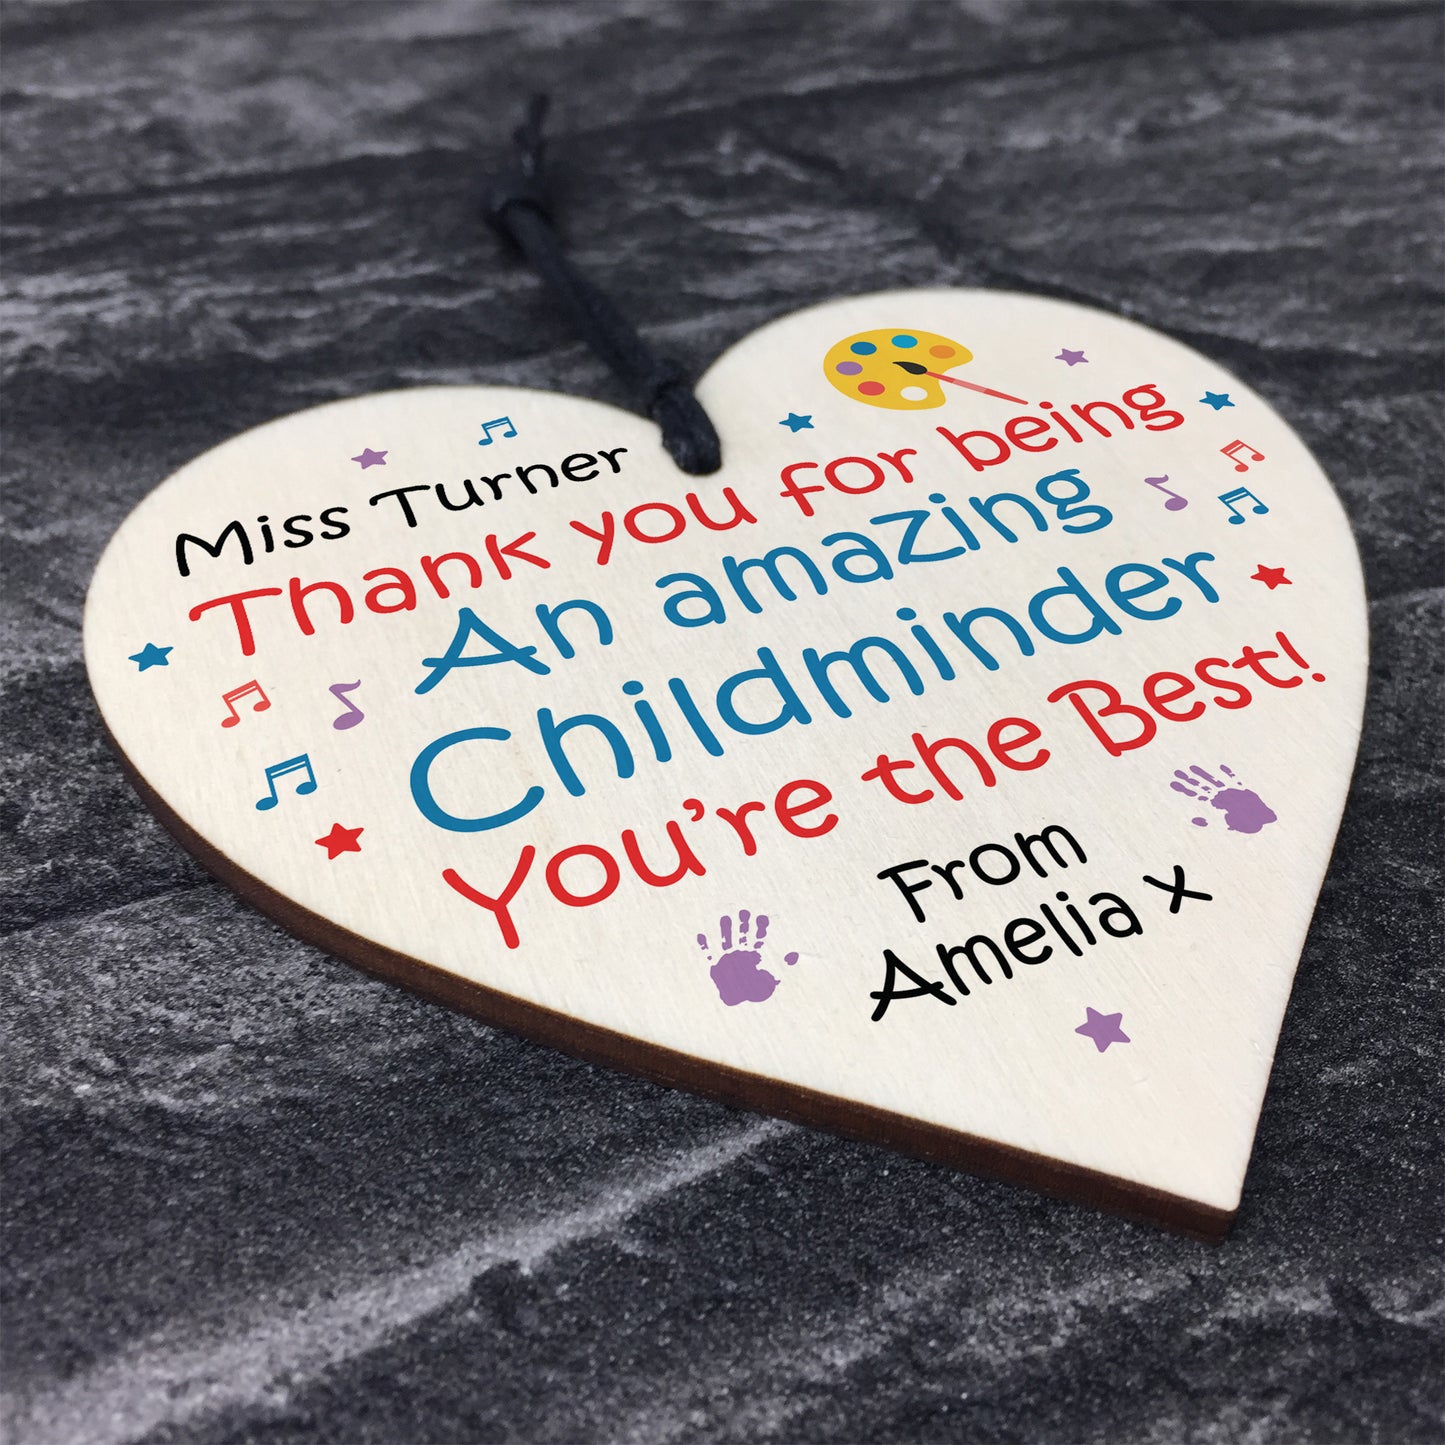 Personalised Wood Childminder Gift Heart Plaque Friendship Gift